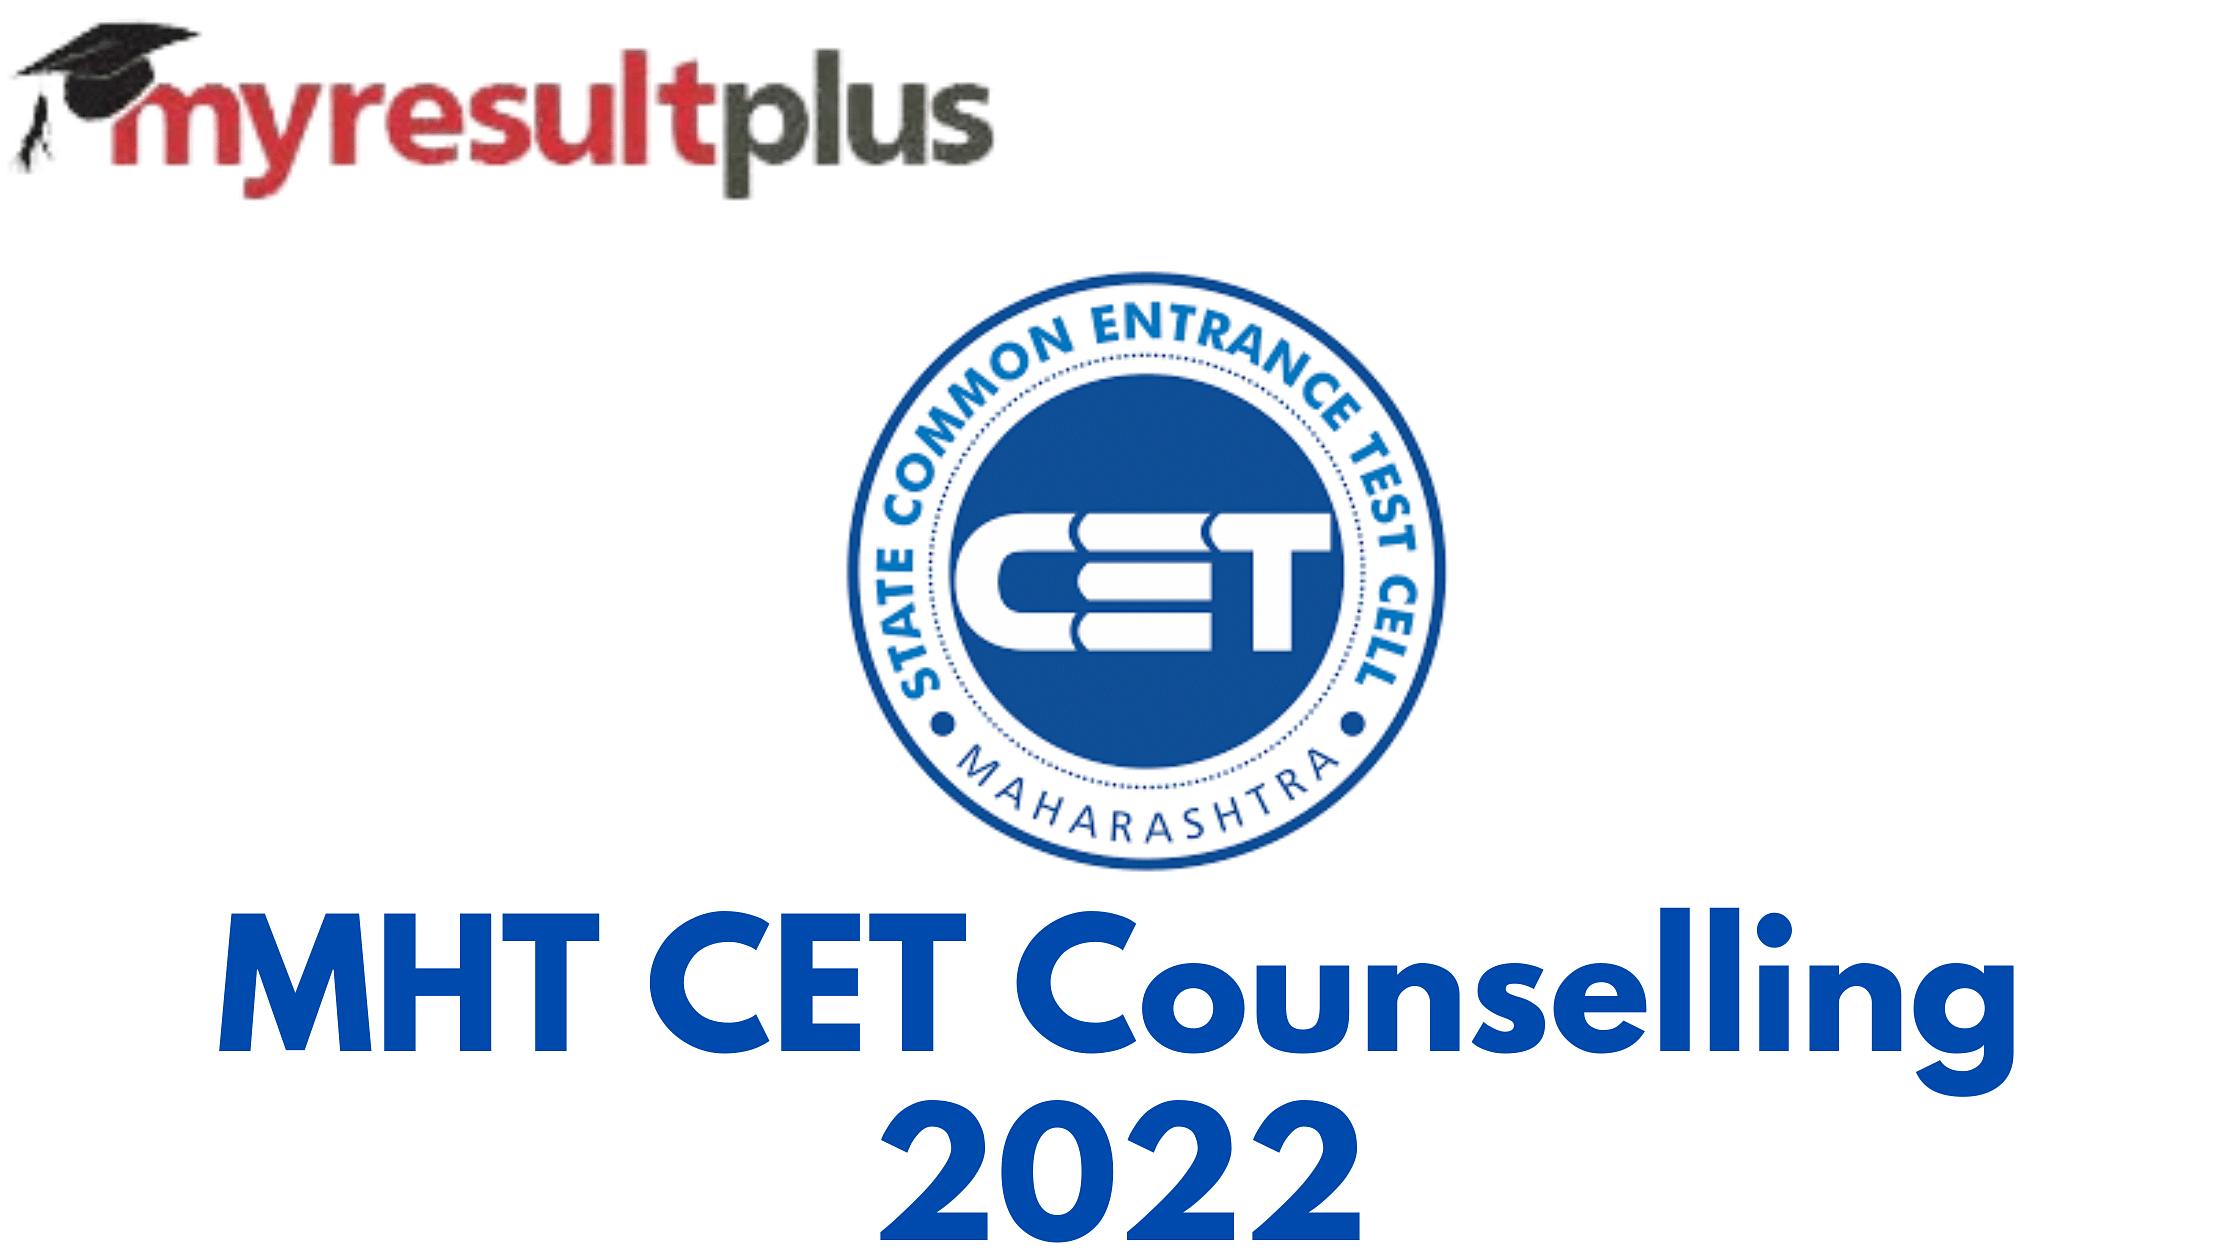 MHT CET Counselling 2022: Registration Ends Today, Know How To Apply Here